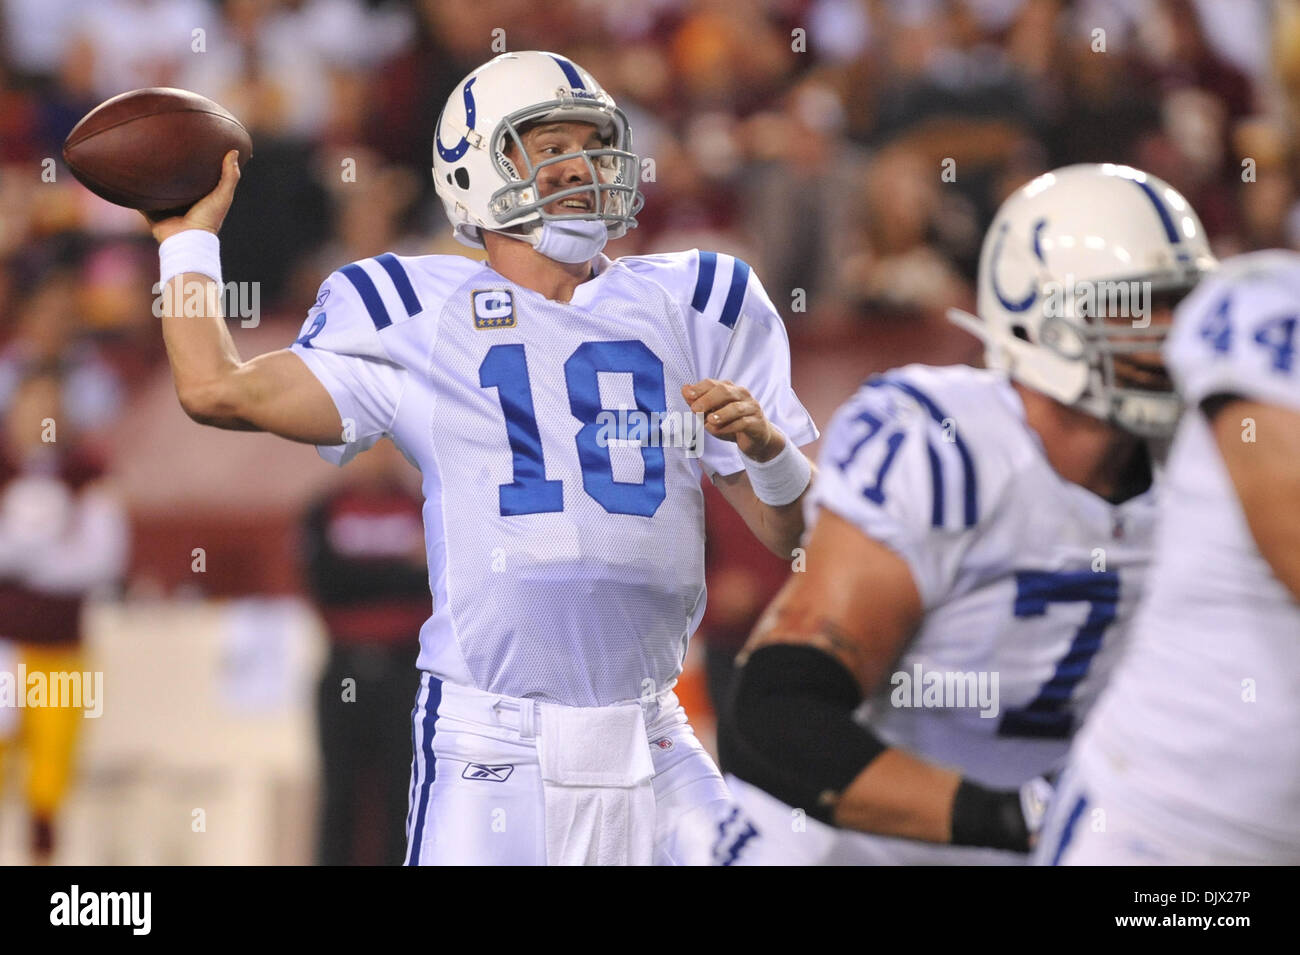 Oct. 17, 2010 - Landover, Maryland, United States of America - Indianapolis Colts quarterback Peyton Manning (18) looking for an opening, week 6 FedEx Field NFL game action, final score; Colts 27 Redskins 24 (Credit Image: © Roland Pintilie/Southcreek Global/ZUMApress.com) Stock Photo